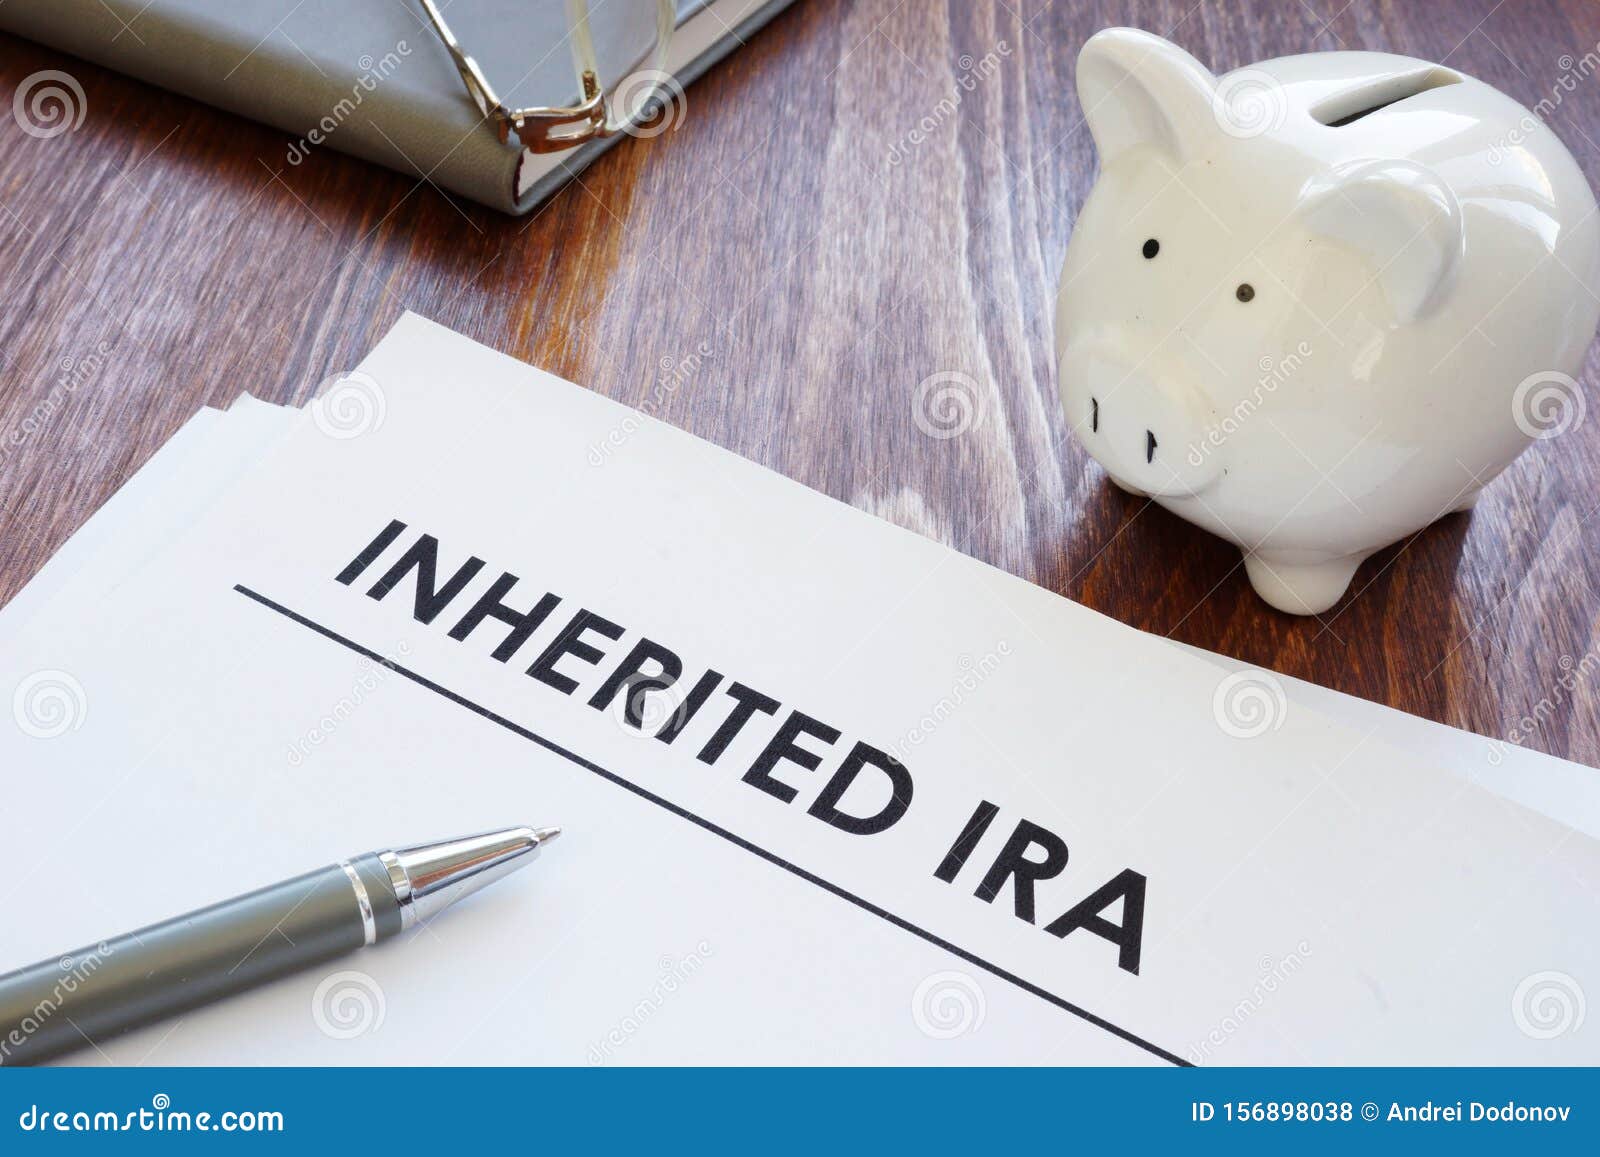 conceptual photo showing printed text inherited ira